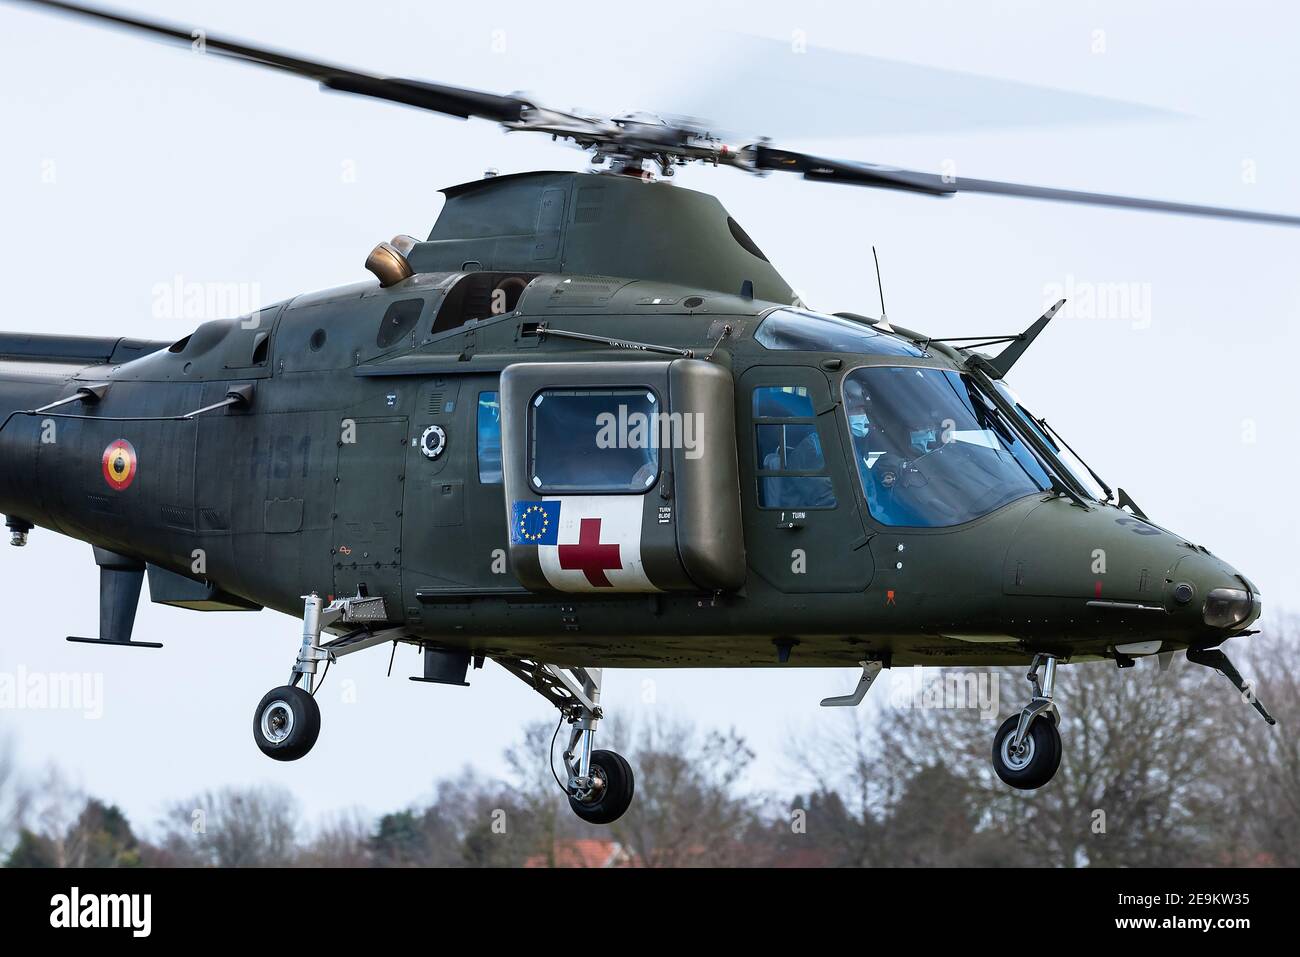 A AgustaWestland AW109 military helicopter from the 17th Squadron of the Belgian Air Force. Stock Photo